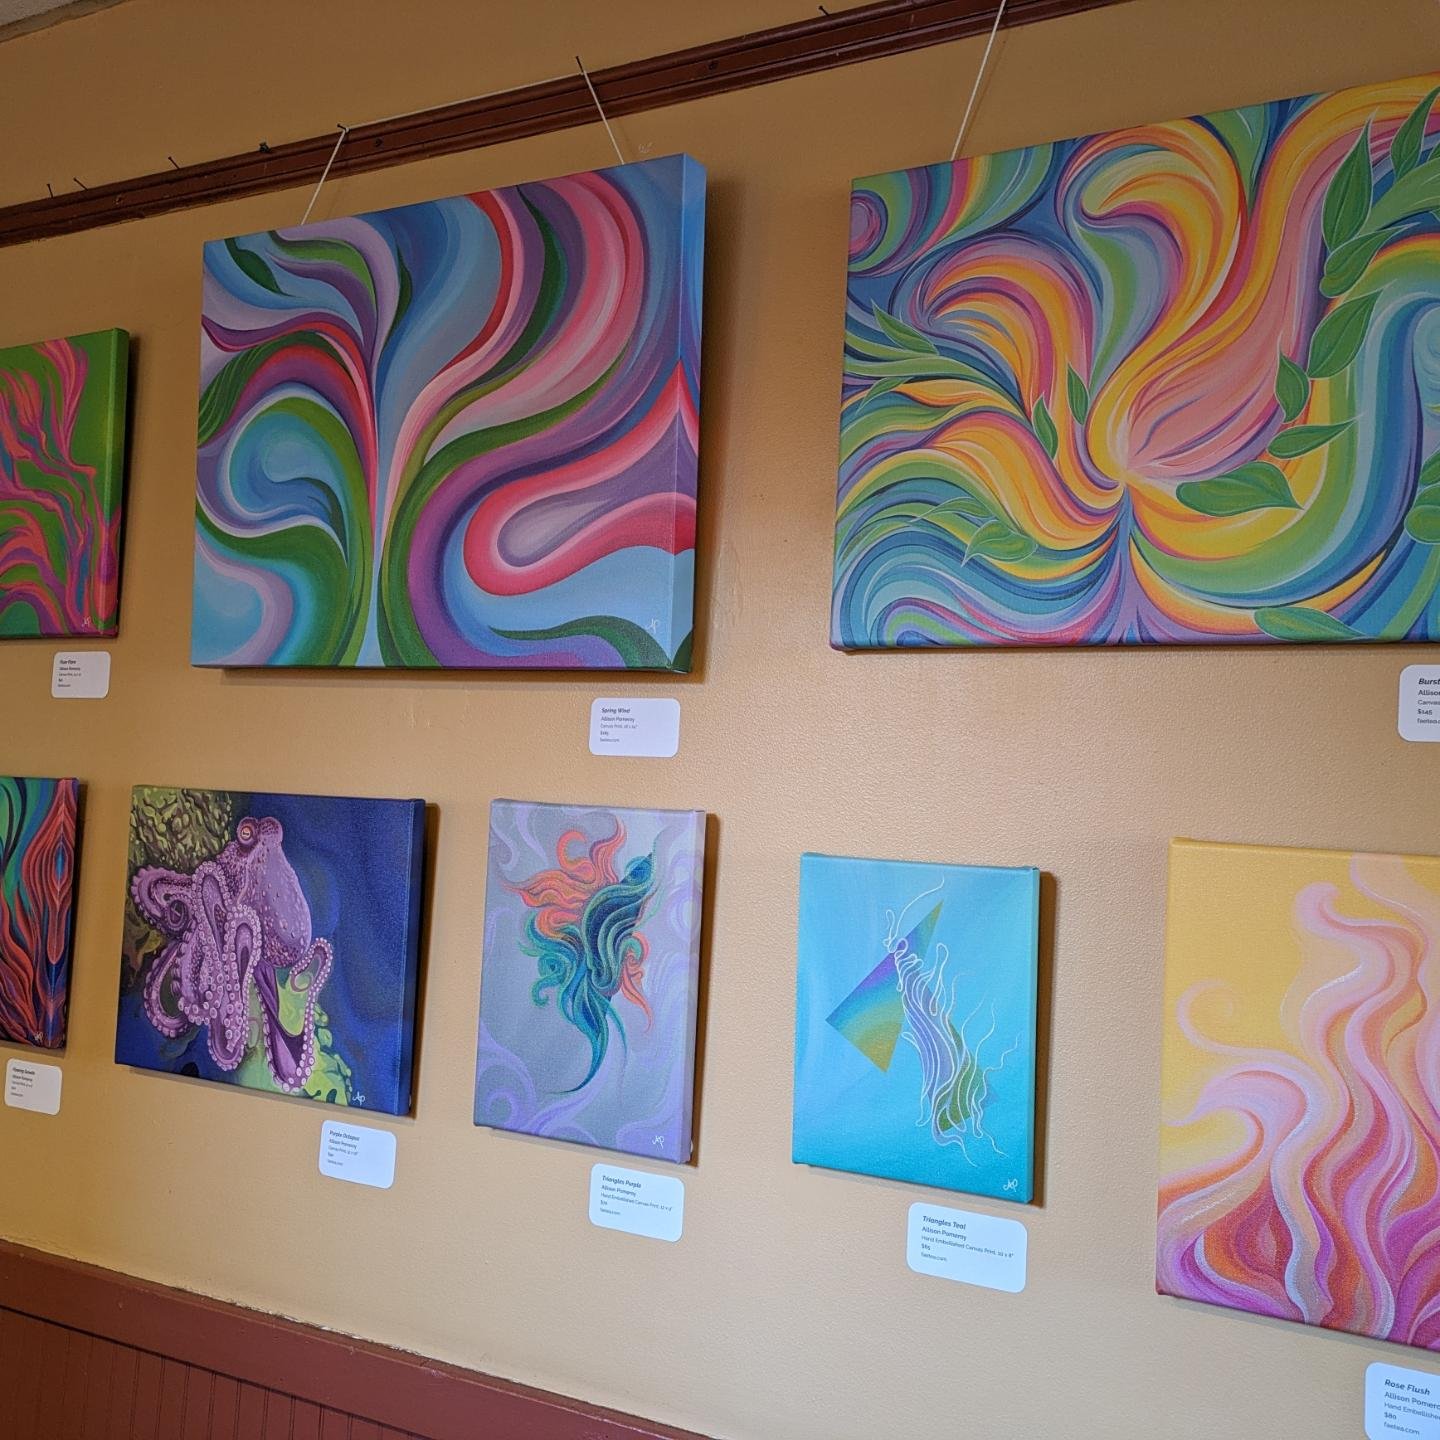 For the months of April and May my art is at 1369 Coffeehouse in Inman